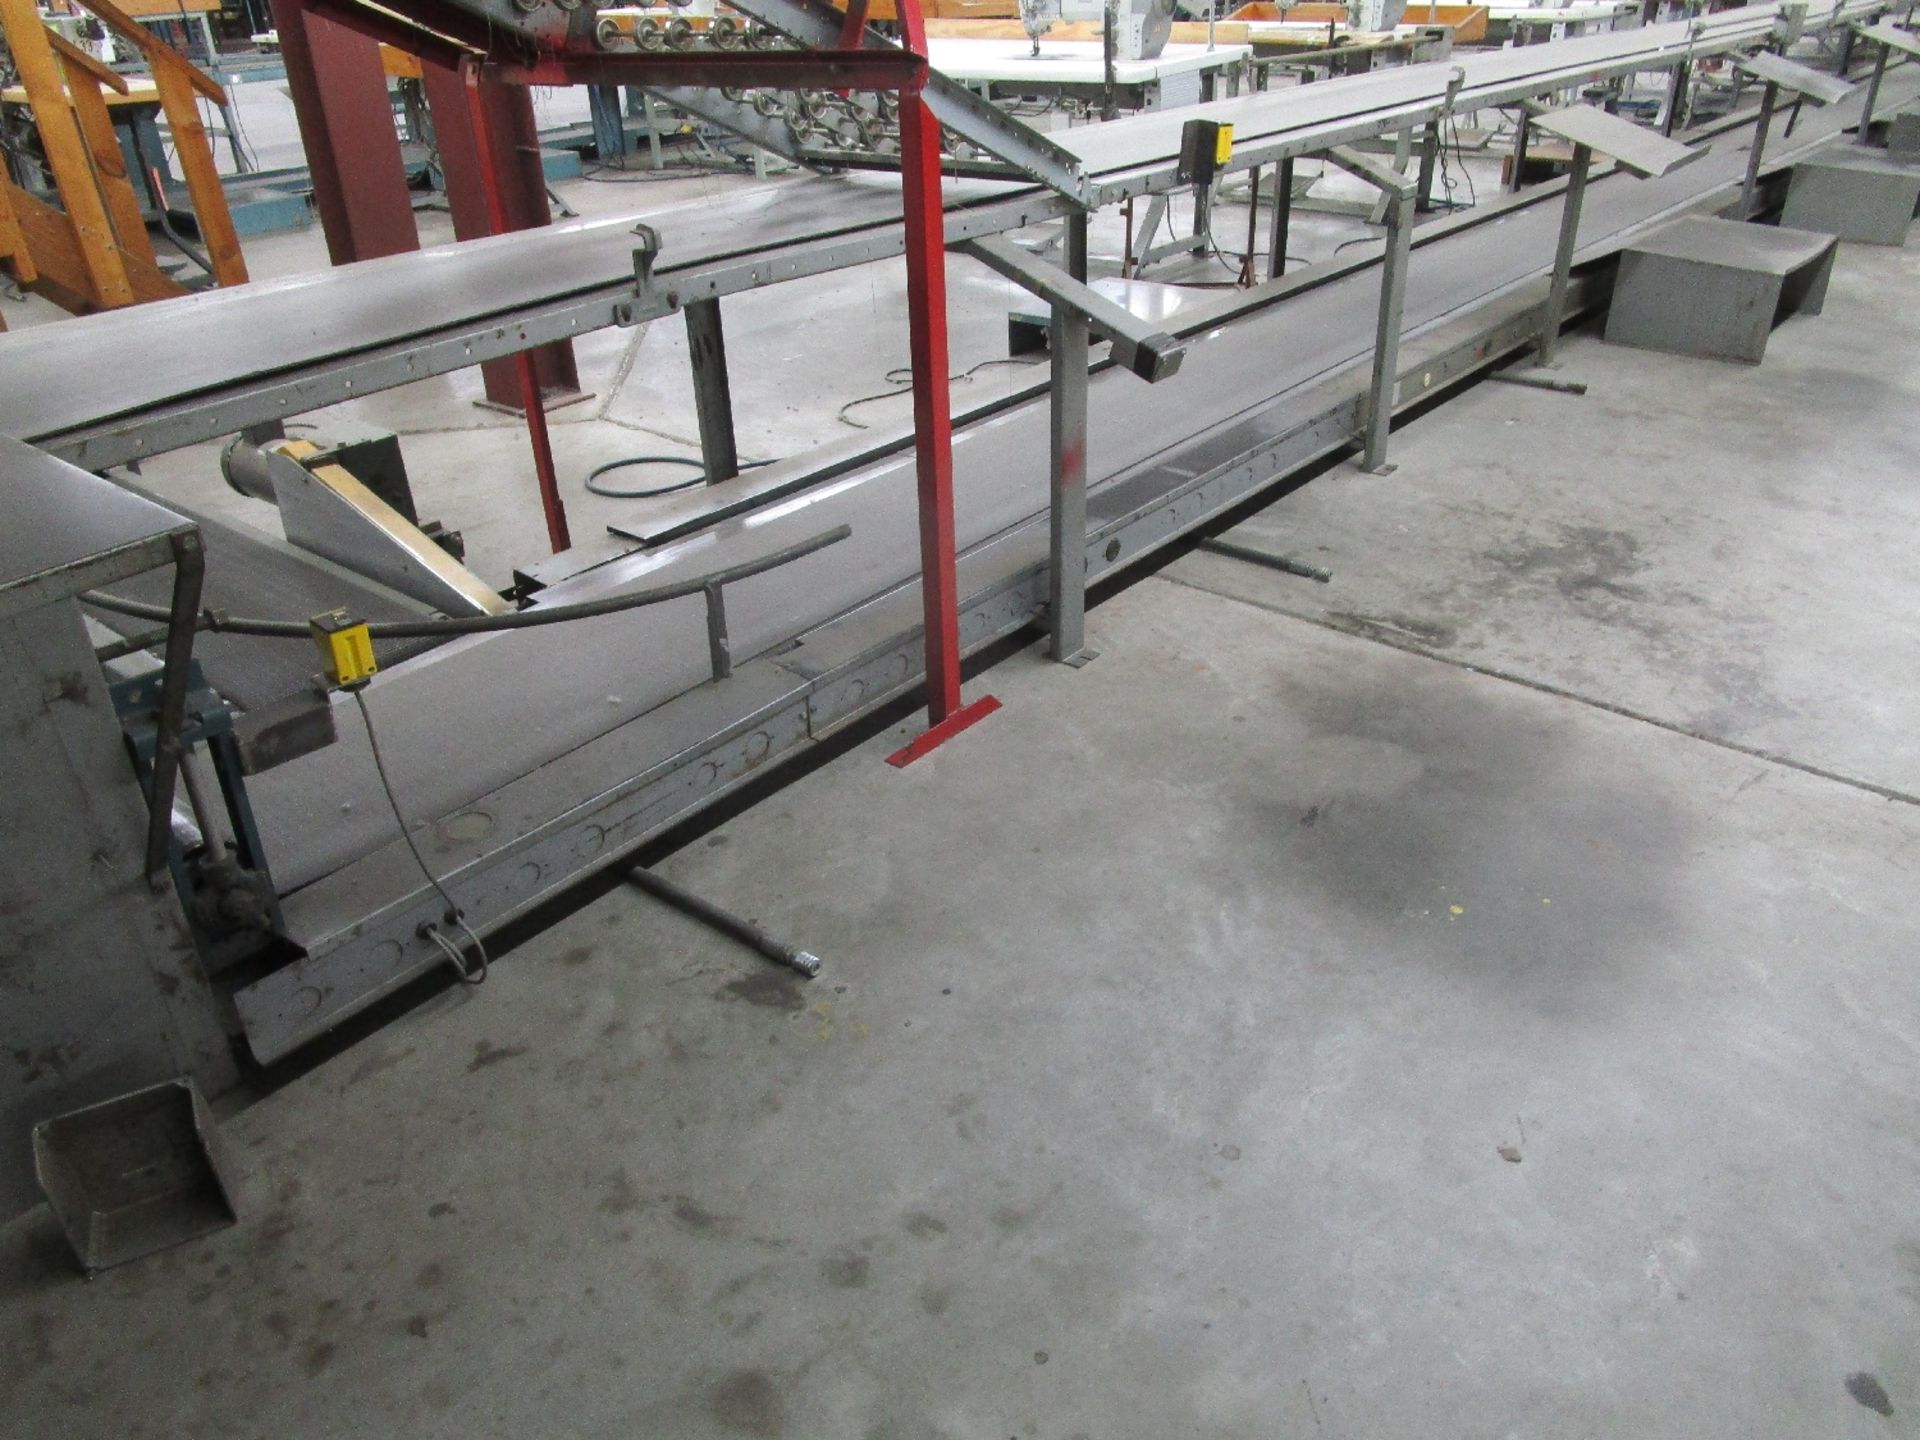 Hytrol Powered Conveyor System Throughout Sewing Department - Image 6 of 7